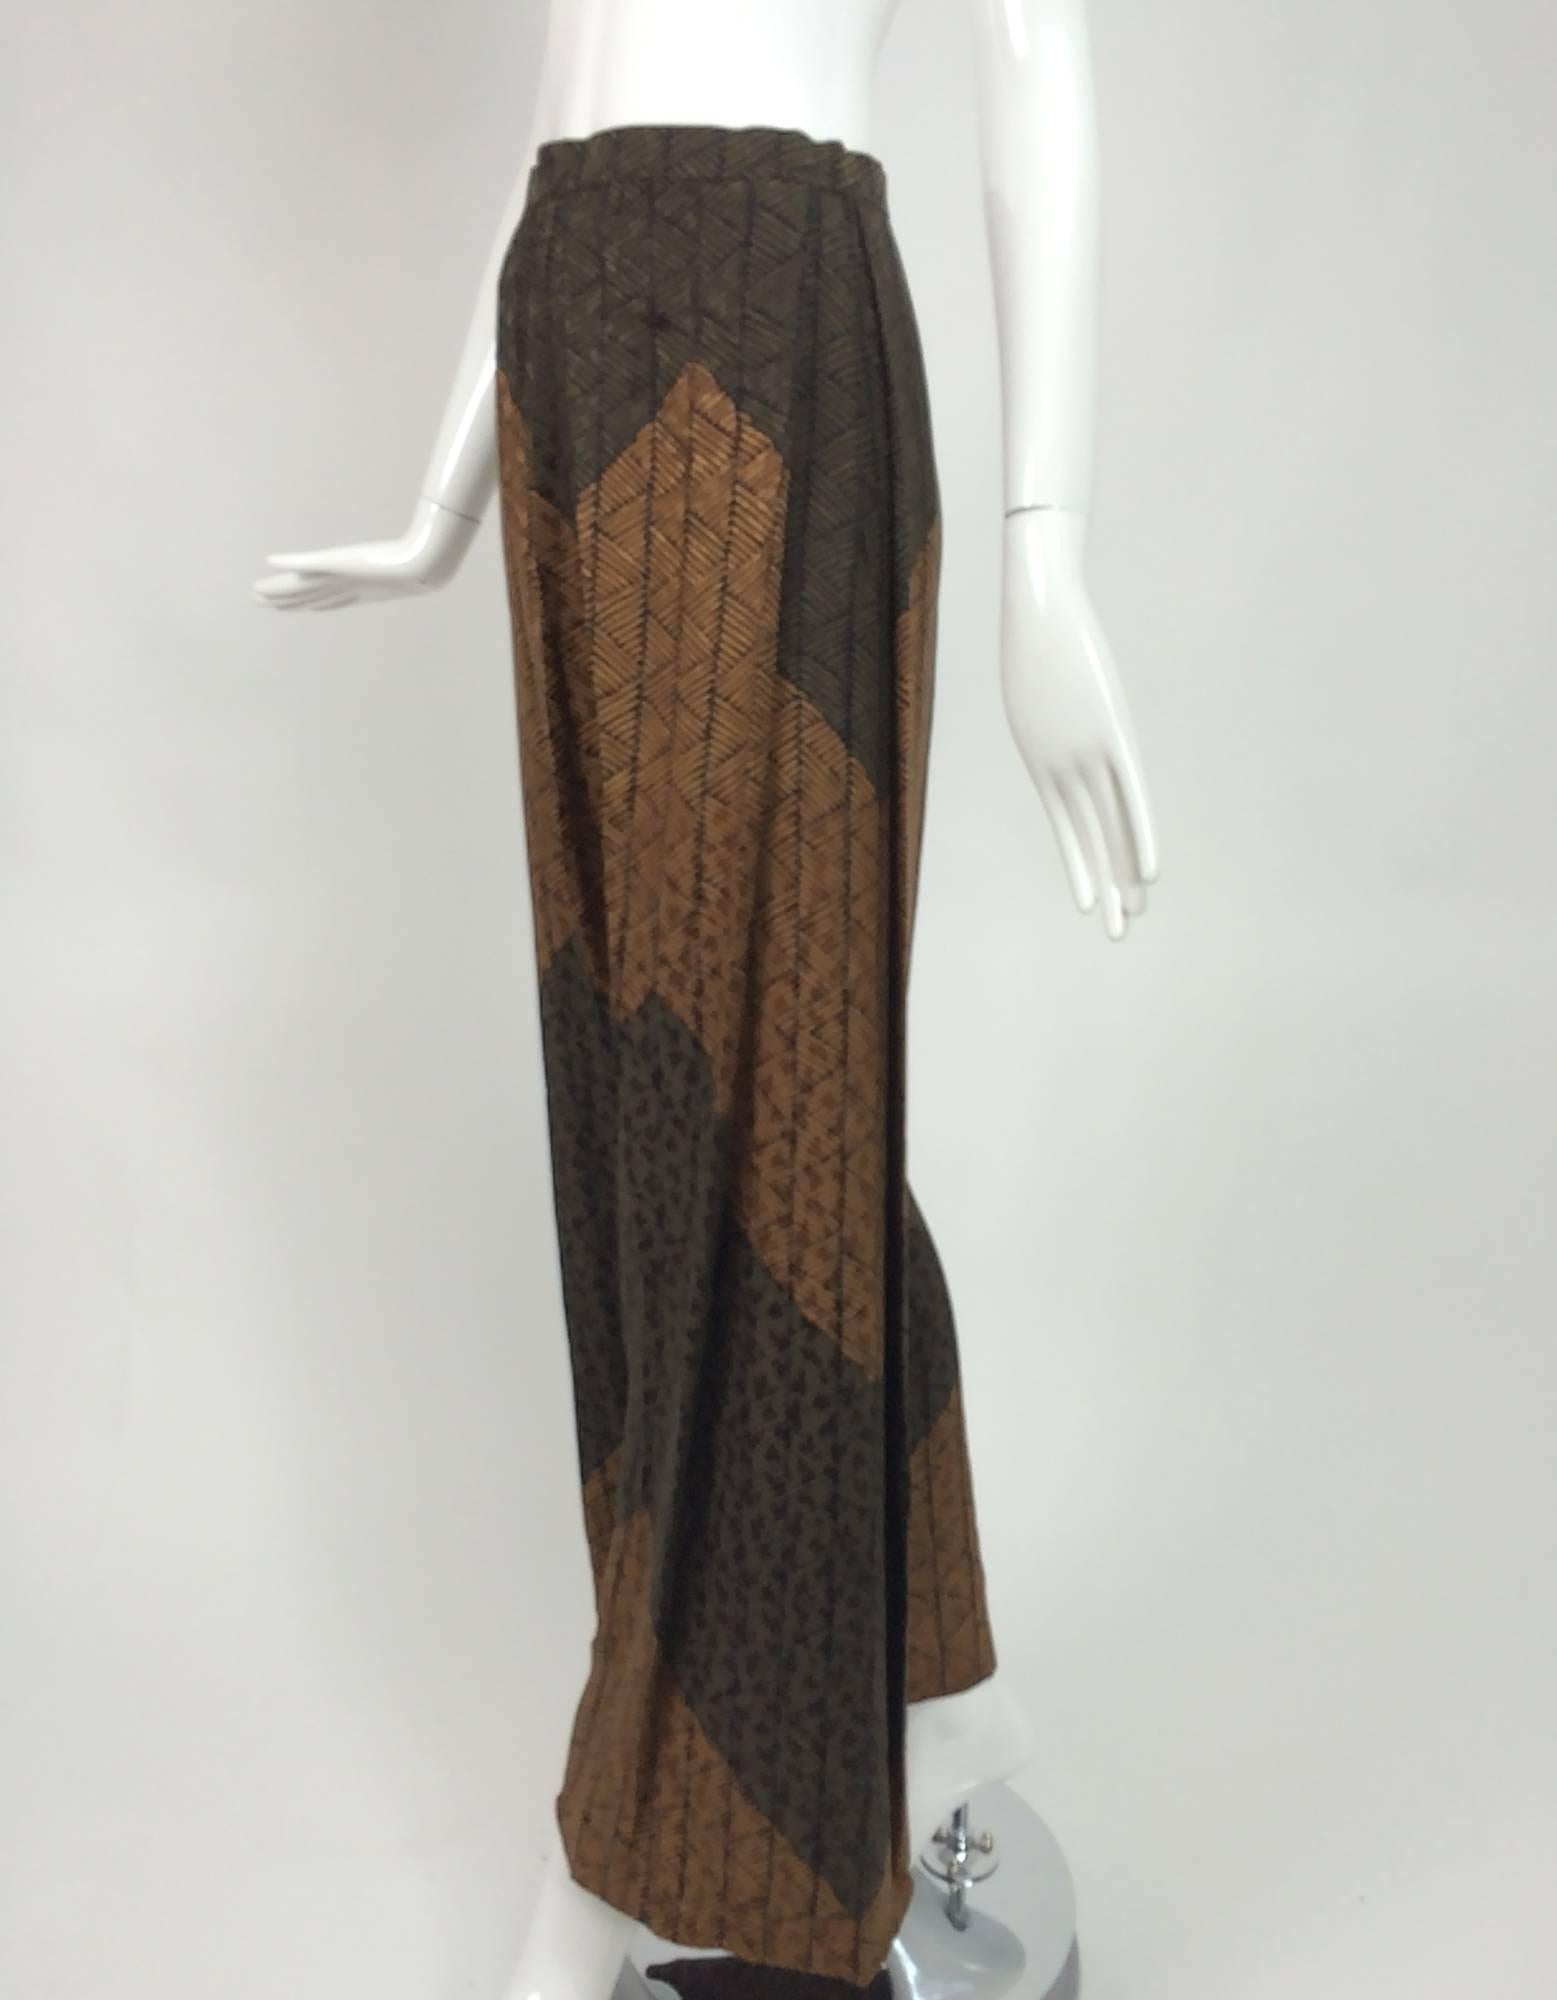 Carolina Herrera cocoa/chocolate geometric print figured silk wide leg trouser...Trousers sit at the natural waist and close at the back with 2 bar hooks...Inverted pleat at each hip side that opens and flows to the ankle...Side seam pockets...Fully